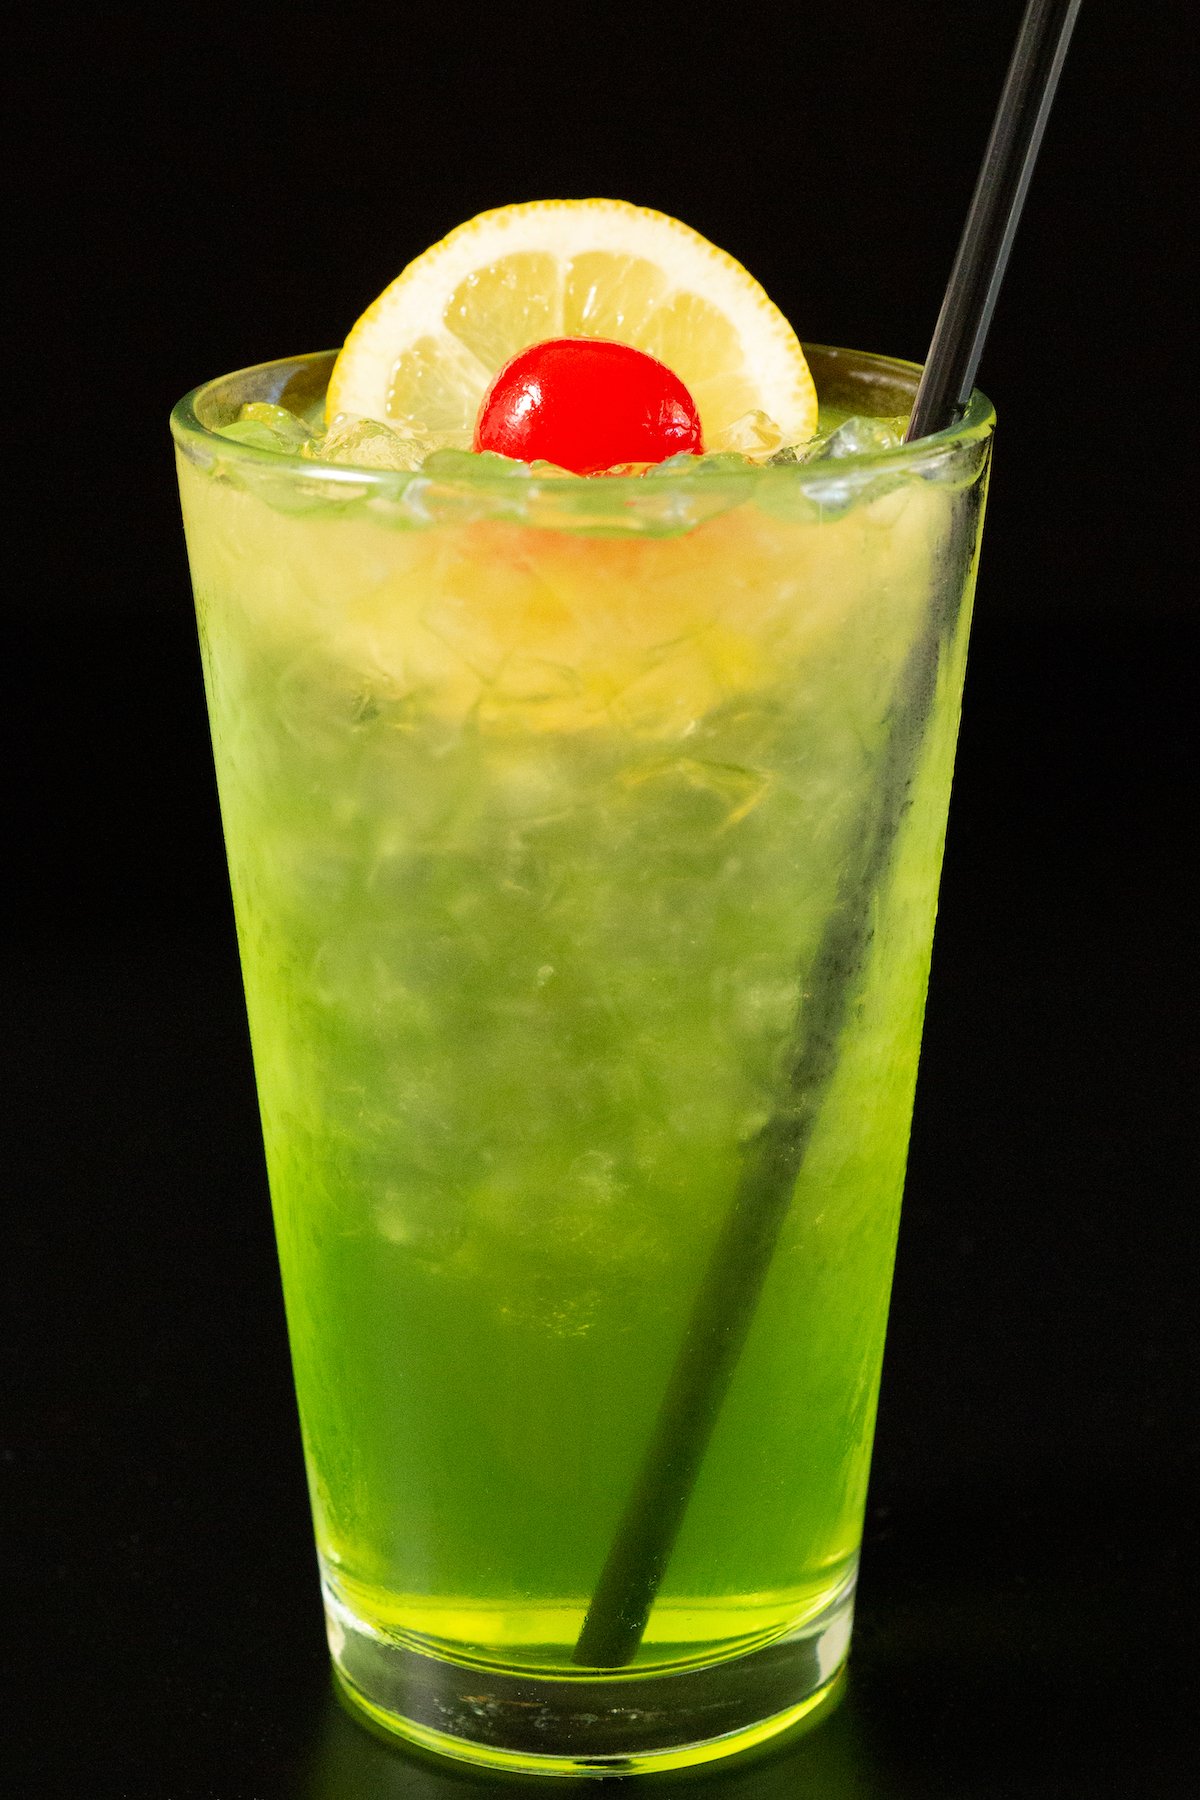 A neon green pint glass of Tokyo Iced Tea on a black background.